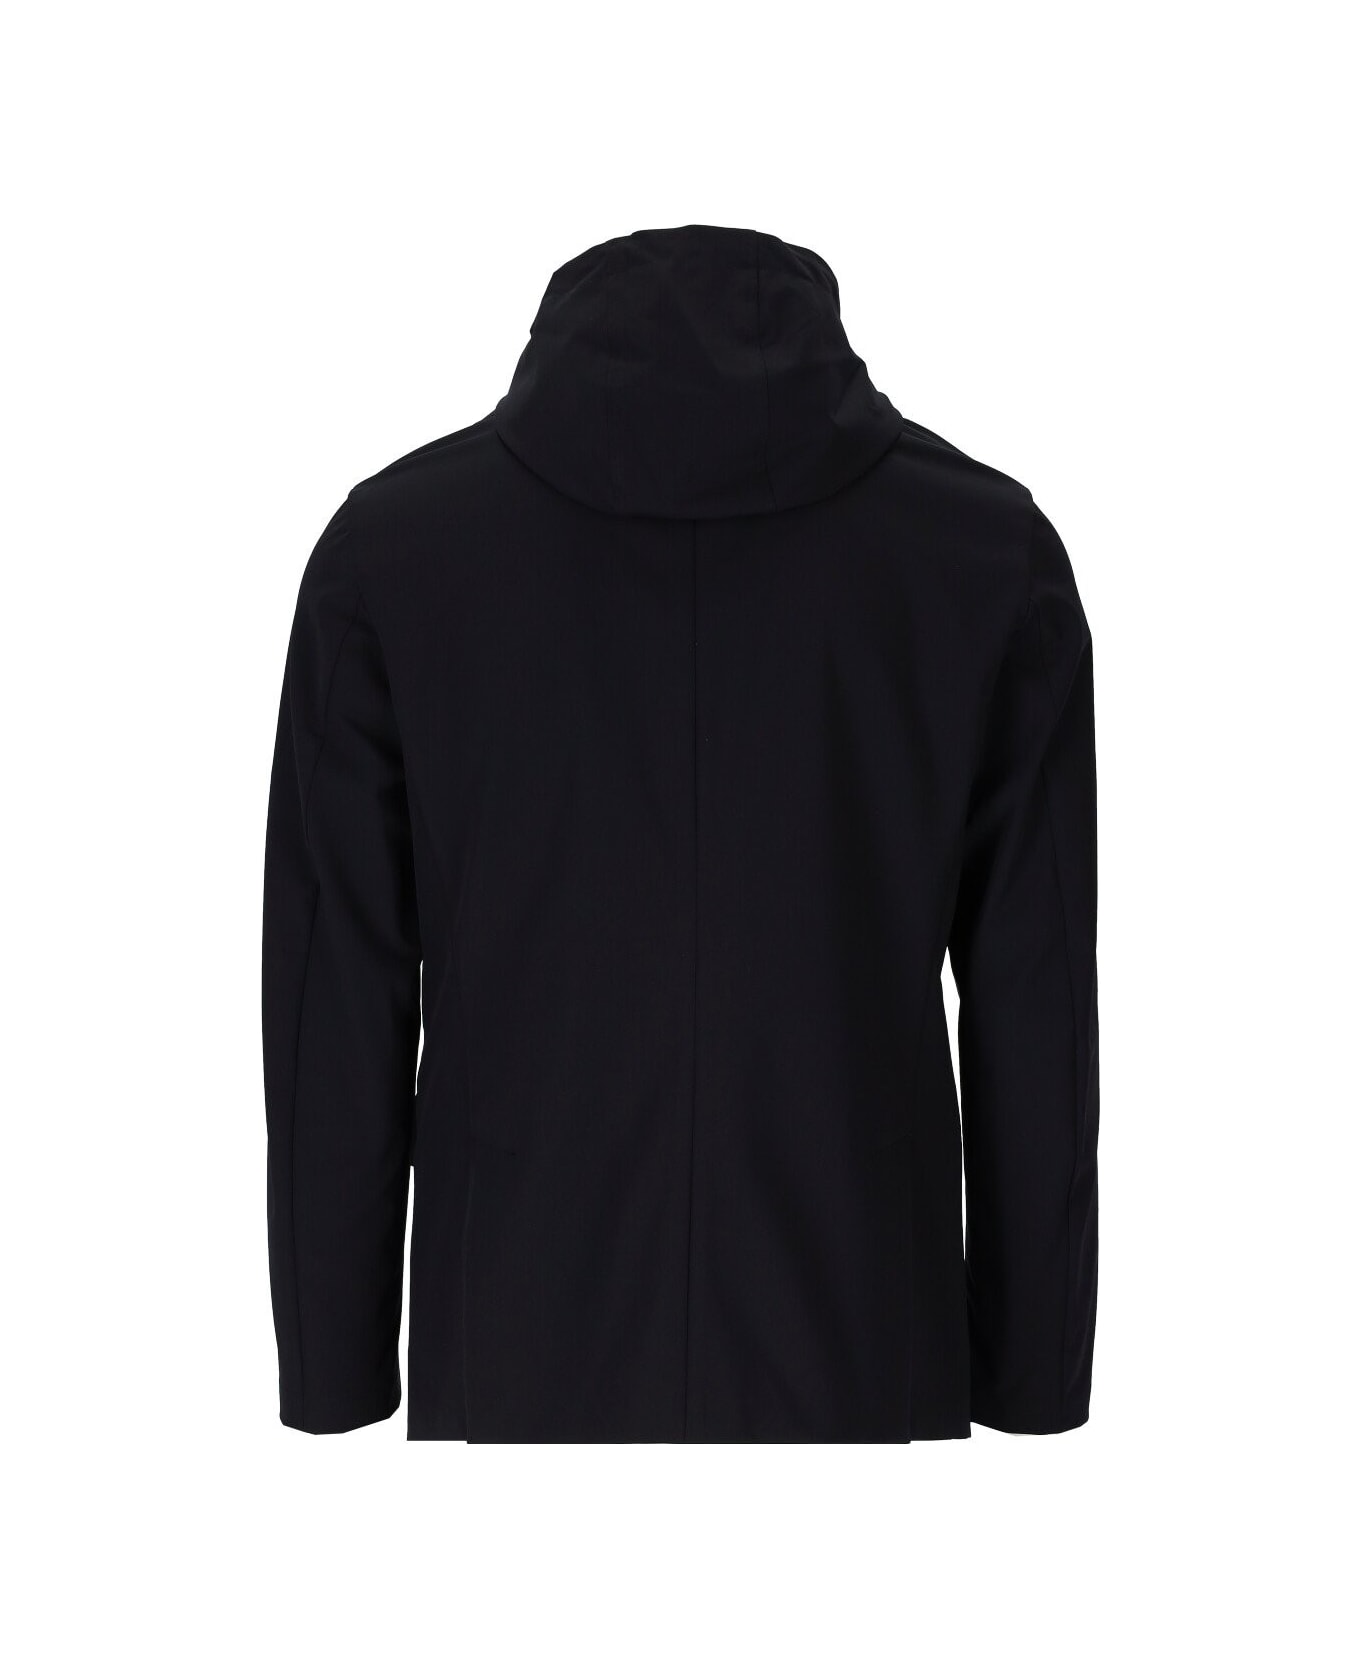 Emporio Armani Blue Double-breasted Hooded Jacket - Blu navy